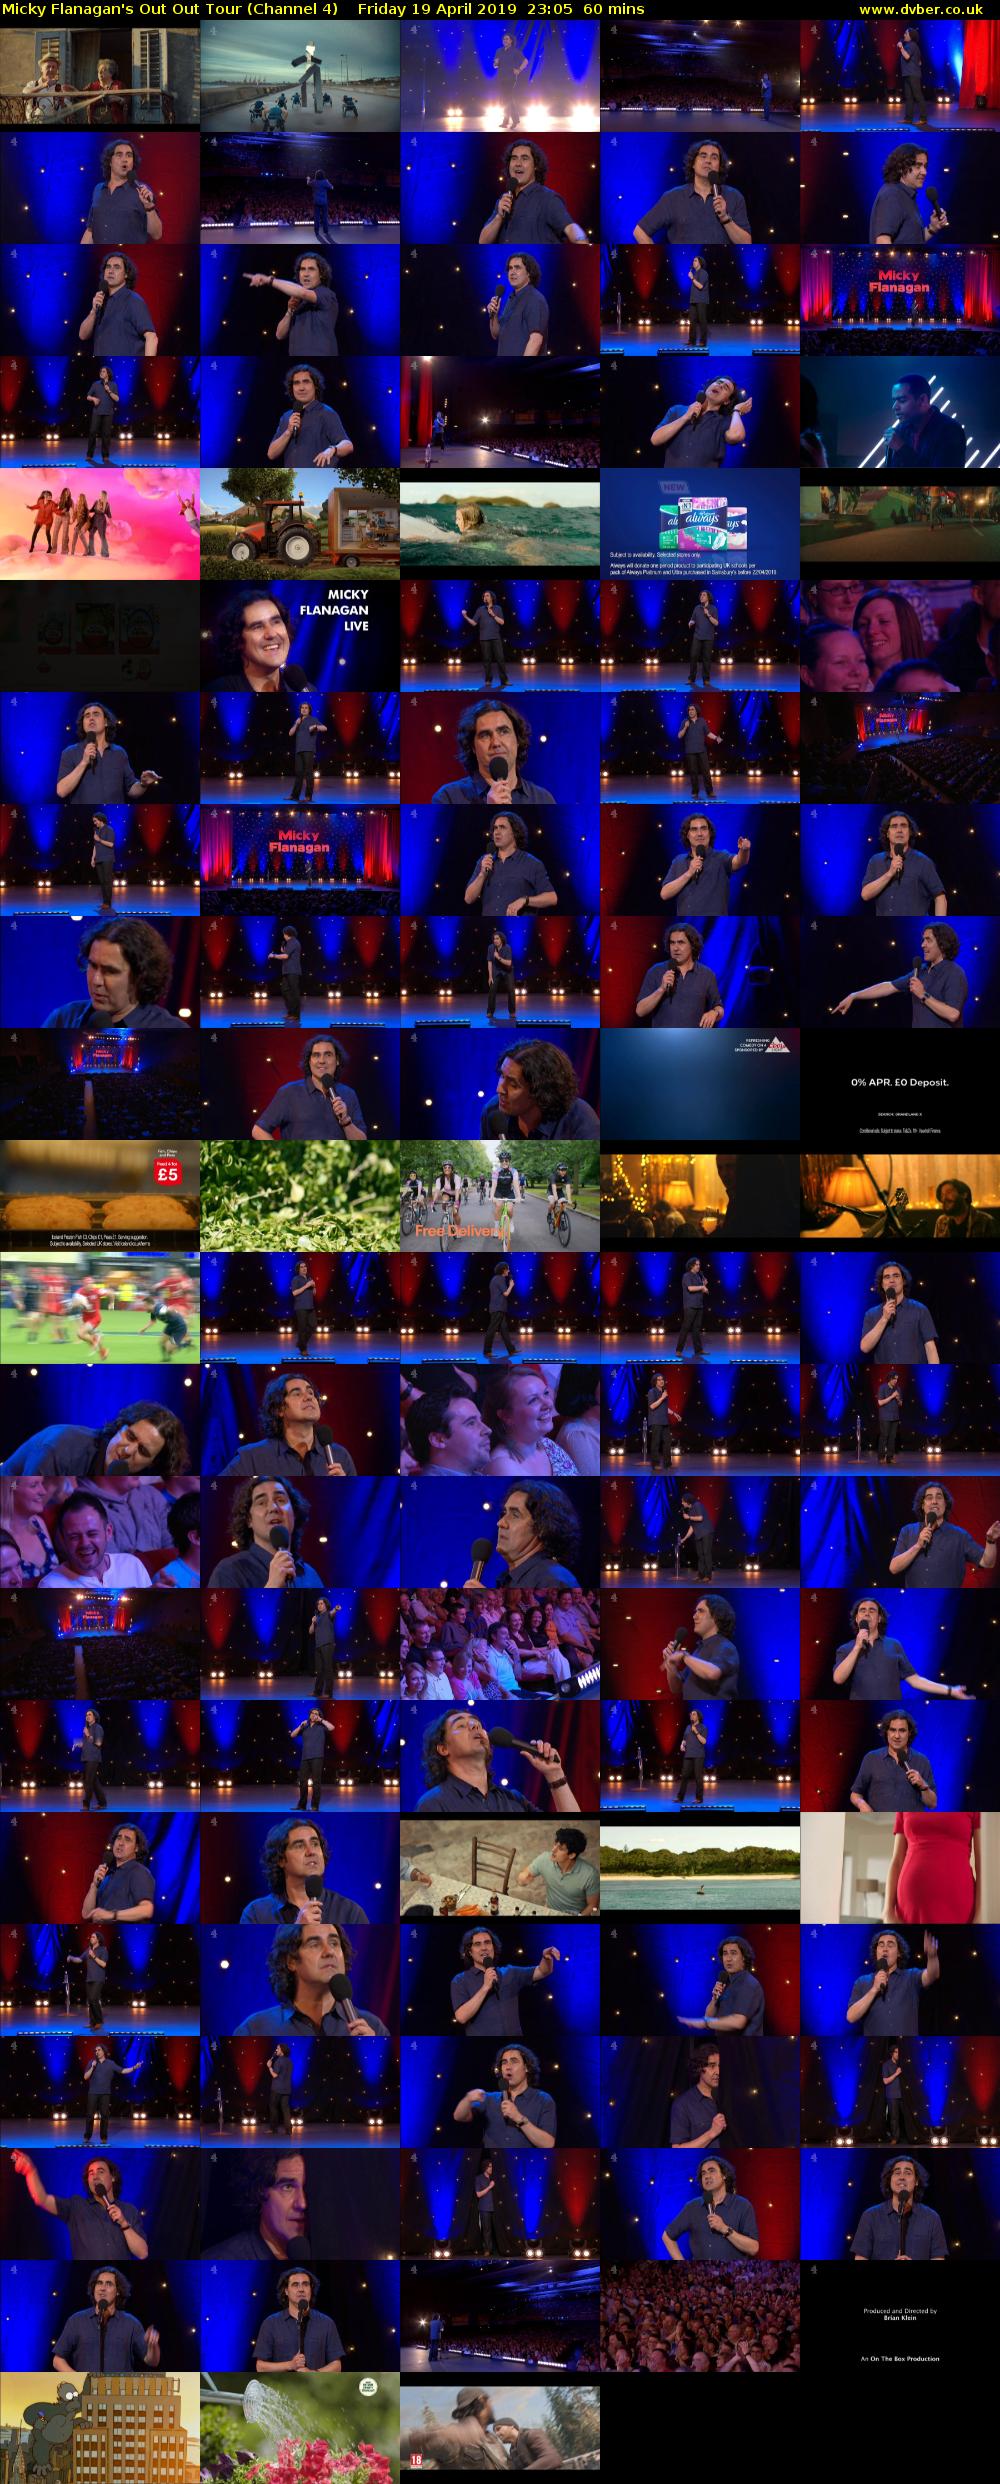 Micky Flanagan's Out Out Tour (Channel 4) Friday 19 April 2019 23:05 - 00:05